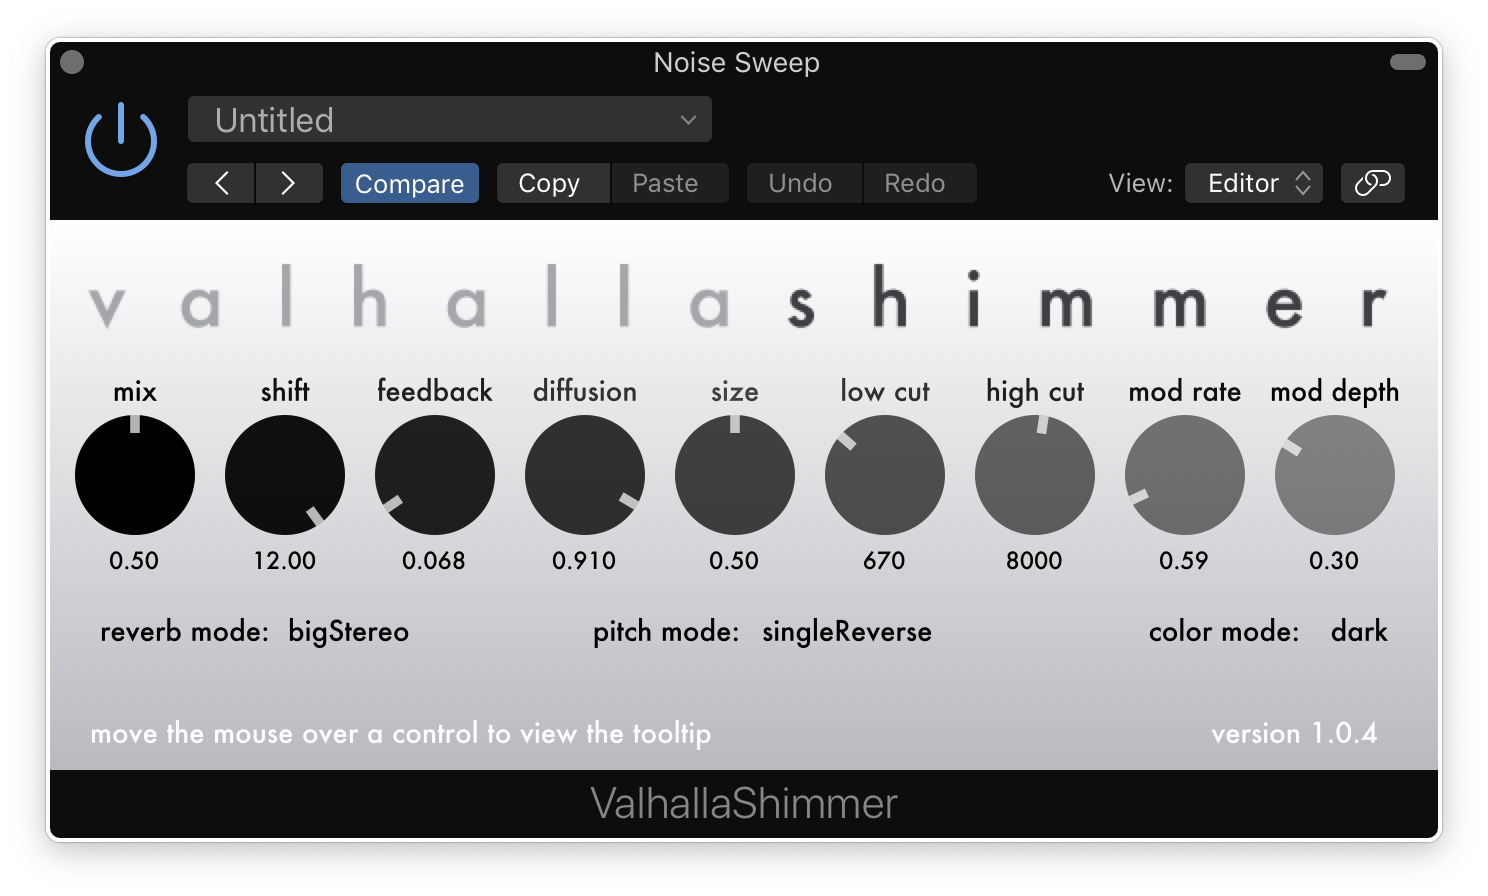 Valhalla DSP can always be relied upon to produce top-notch plugins that are affordable and easy to use.